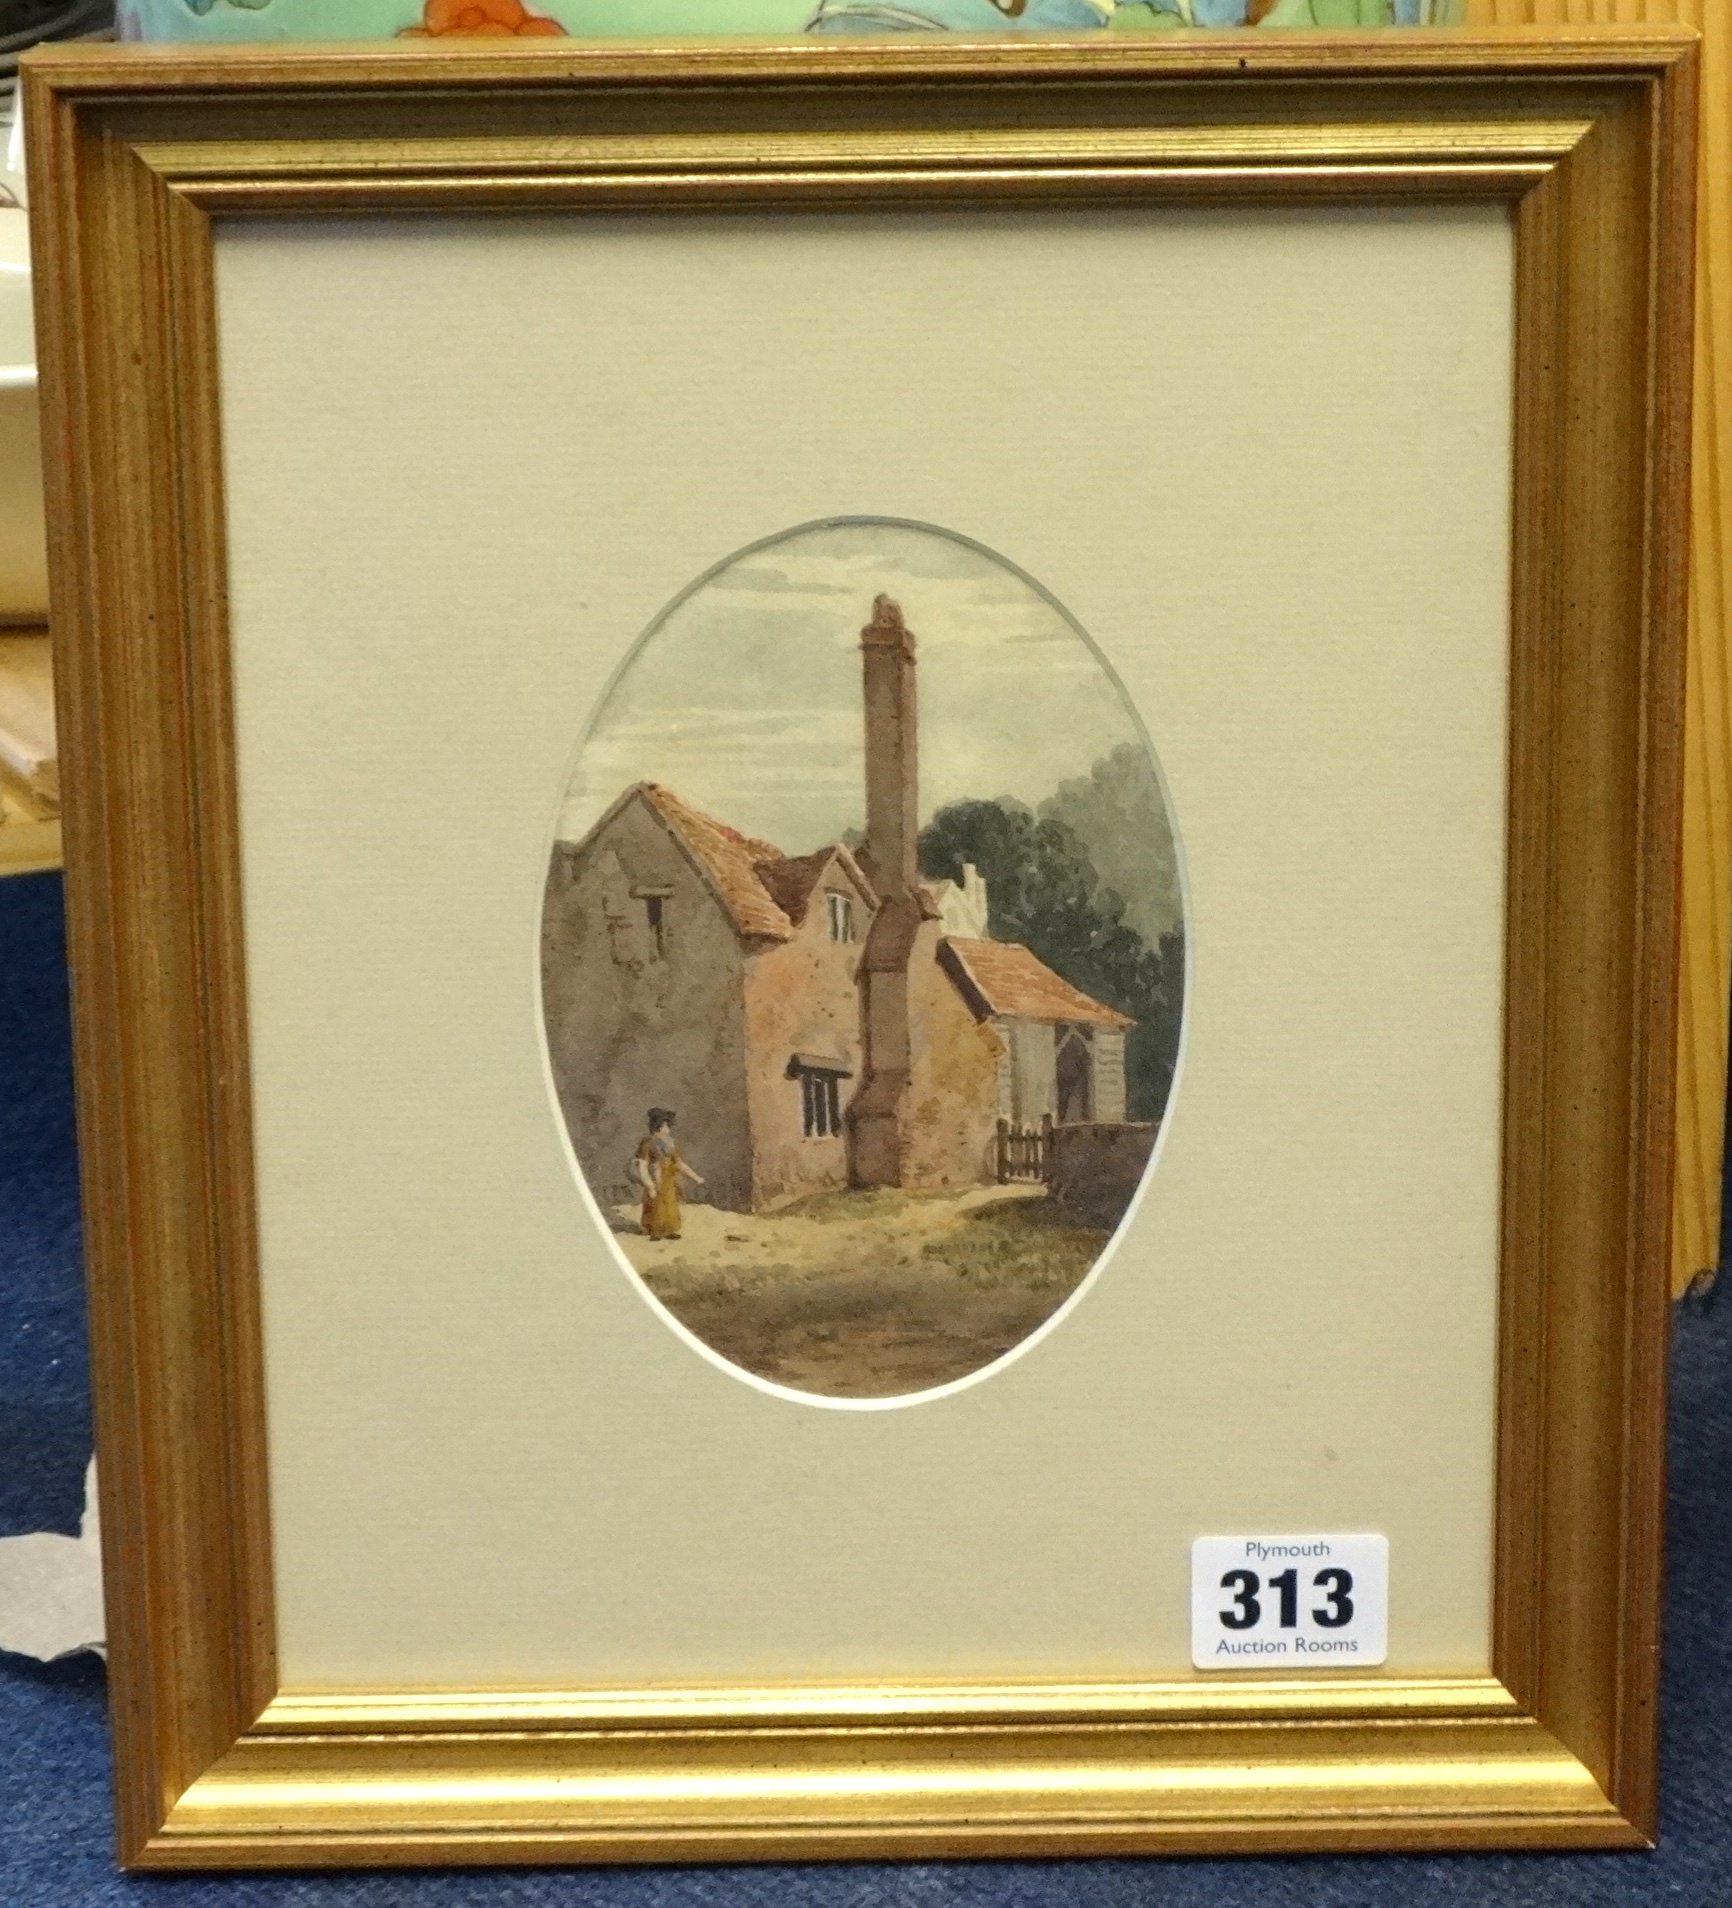 Attributed J.WORSLEY oval small watercolour, 'Figure by a Cottage in Stonehouse', 28cm x 24cm - Image 2 of 2